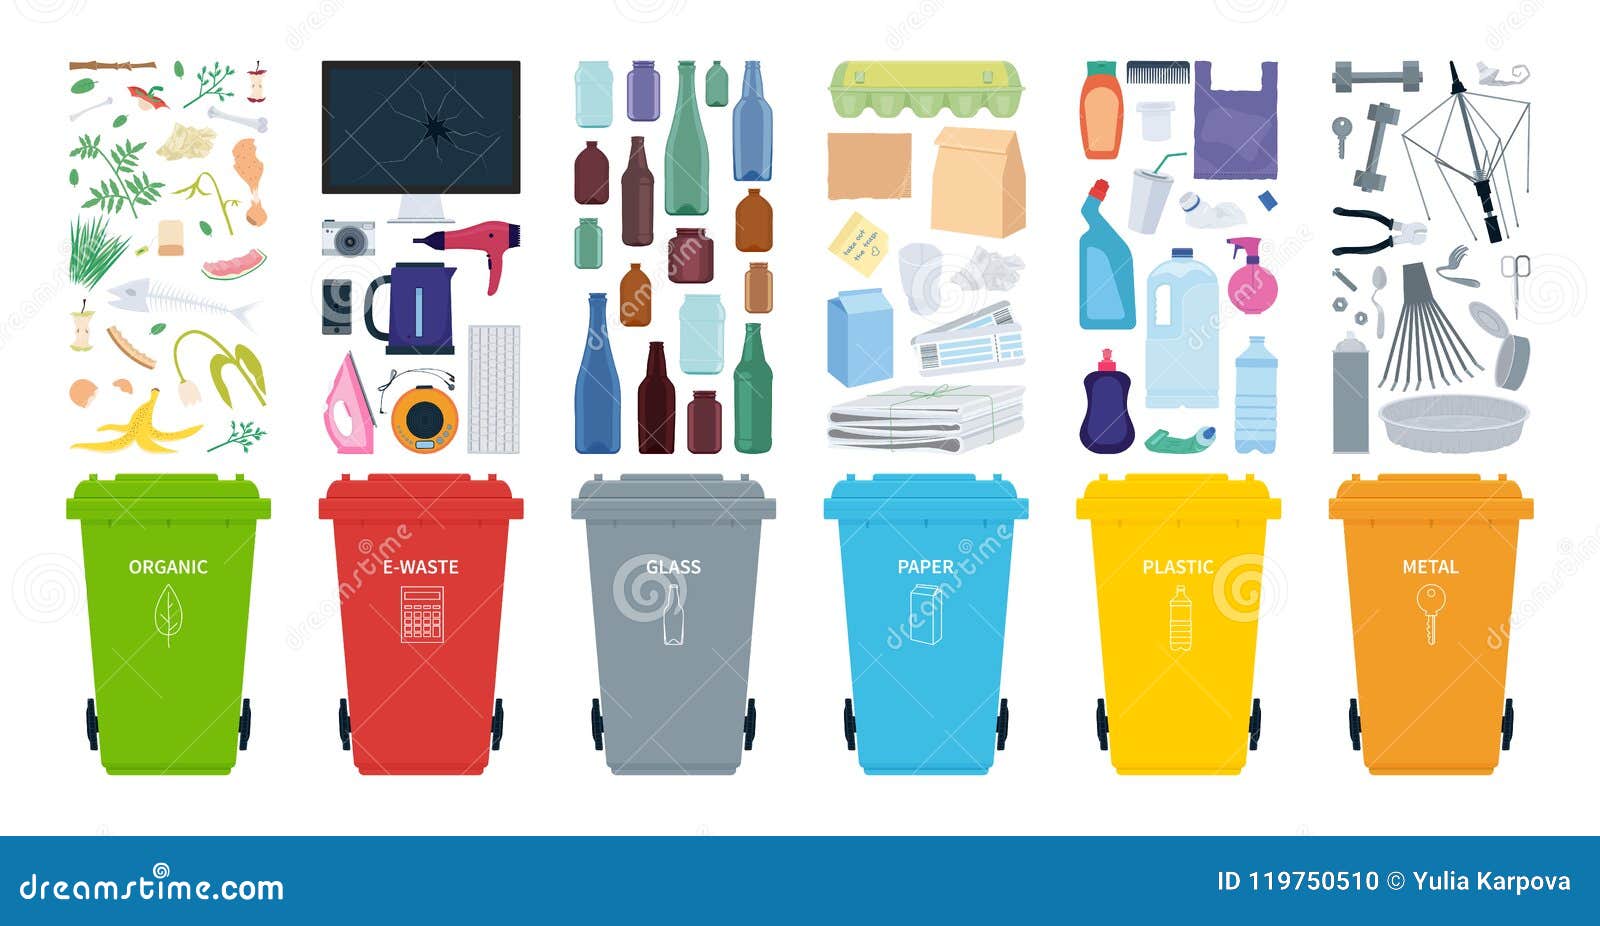 rubbish bins for recycling different types of waste. sort plastic, organic, e-waste, metal, glass, paper.  .